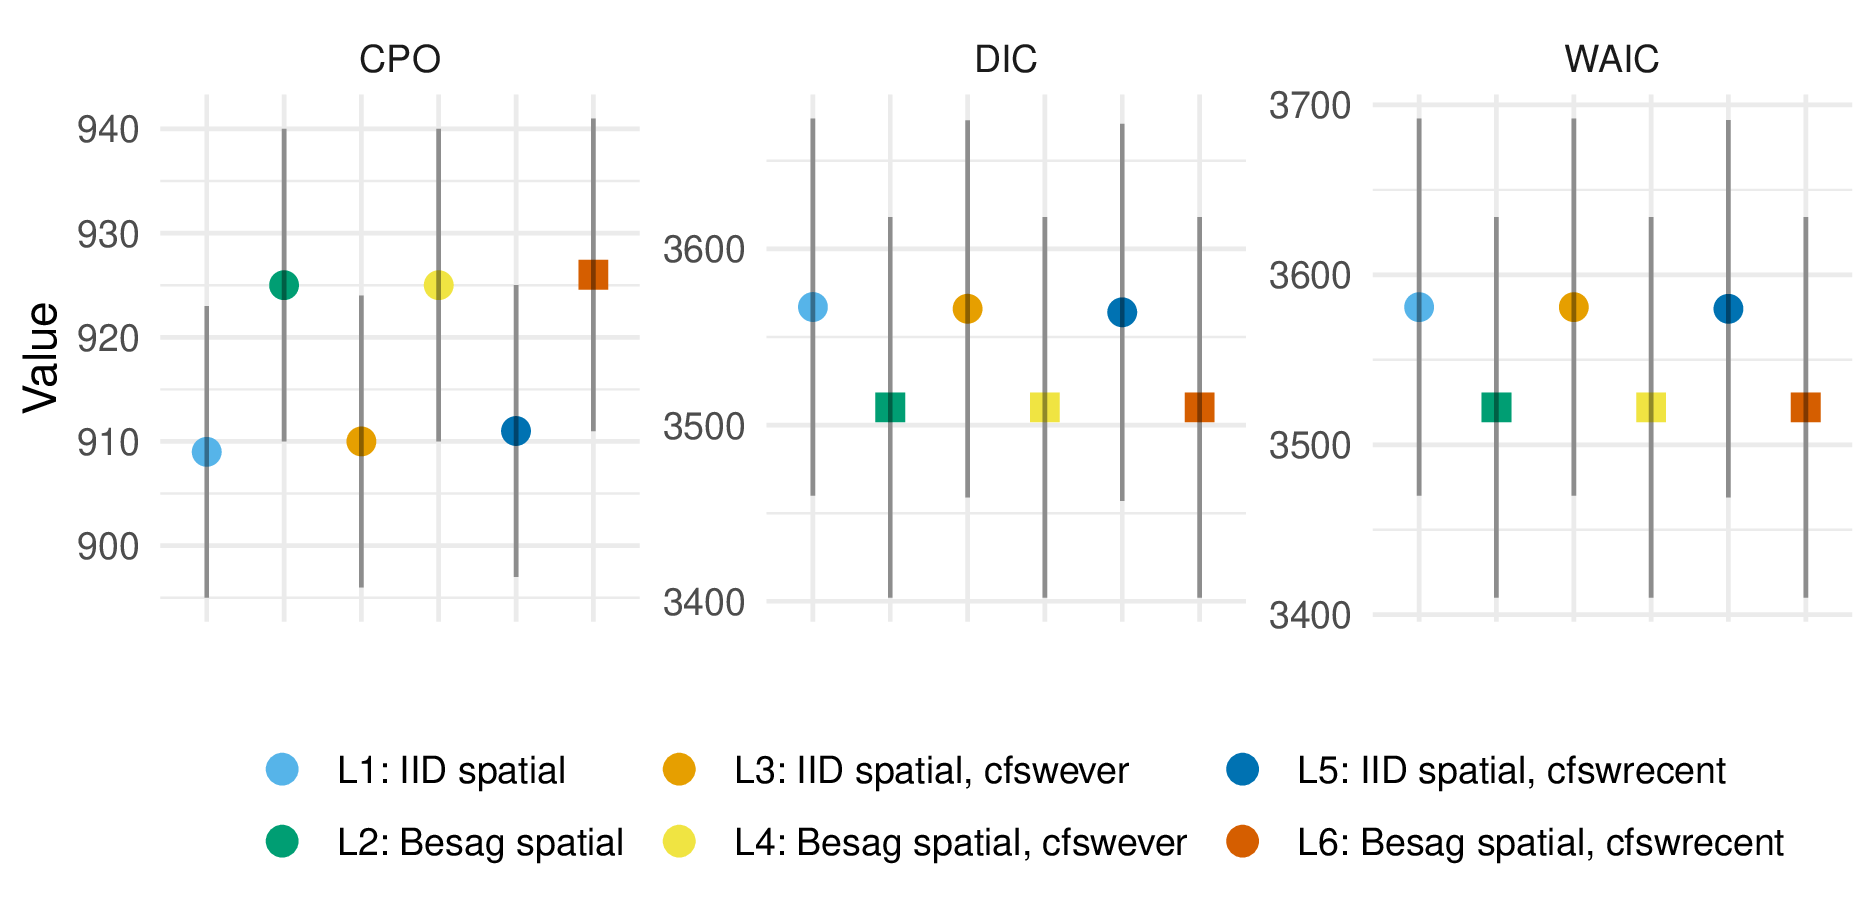 For the logistic regression model, the CPO, DIC, and WAIC each agreed that the model containing Besag spatial random effects and the cfswrecent covariates was best. Inclusion of Besag spatial random effects consistently improved each criterion, whereas improvements from inclusion of any covariates were marginal.